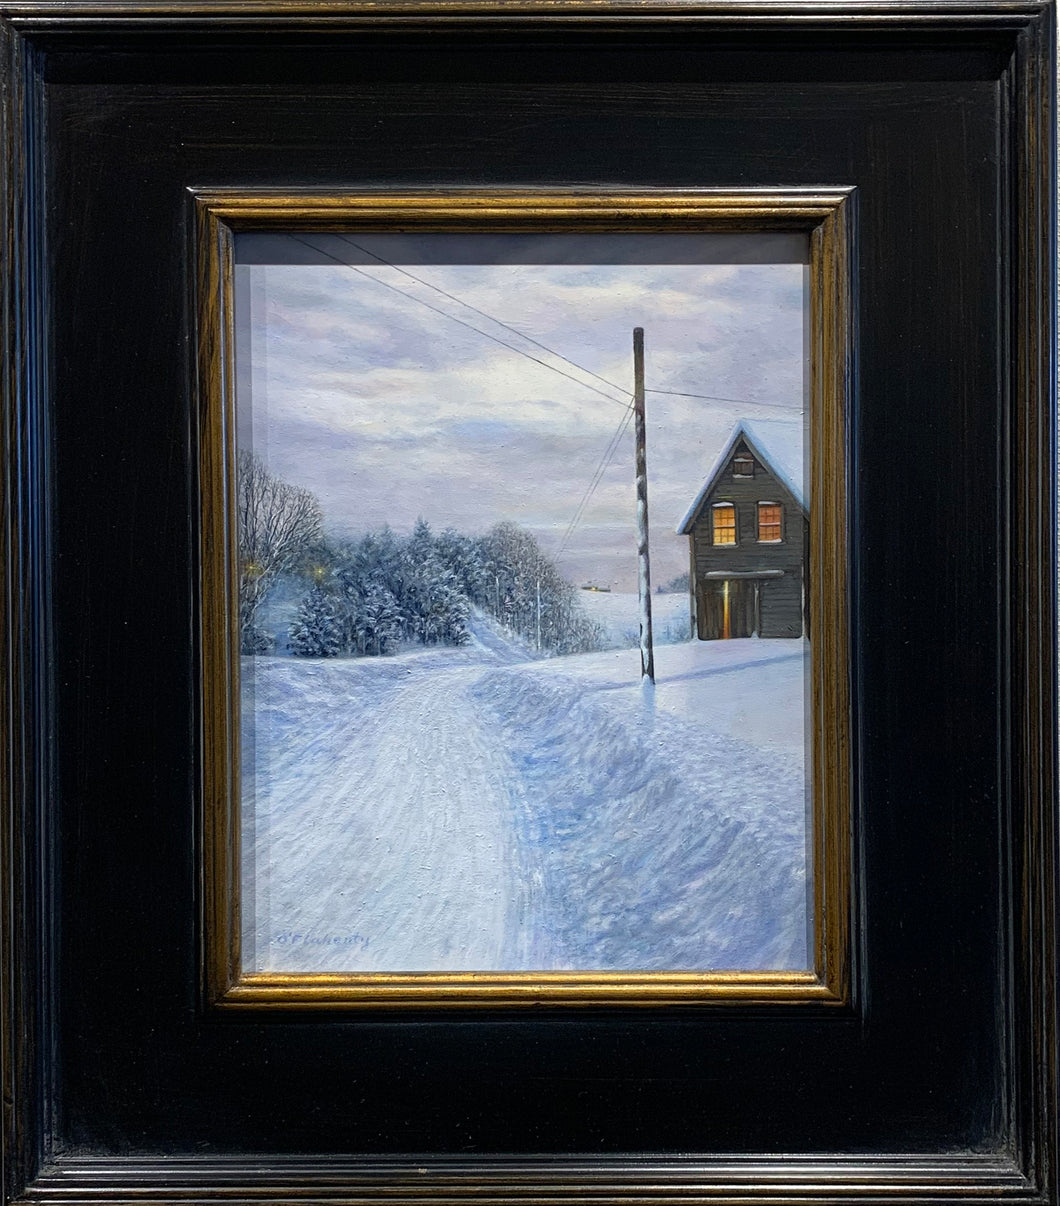 Winter Morning by artist Roderick O'Flaherty